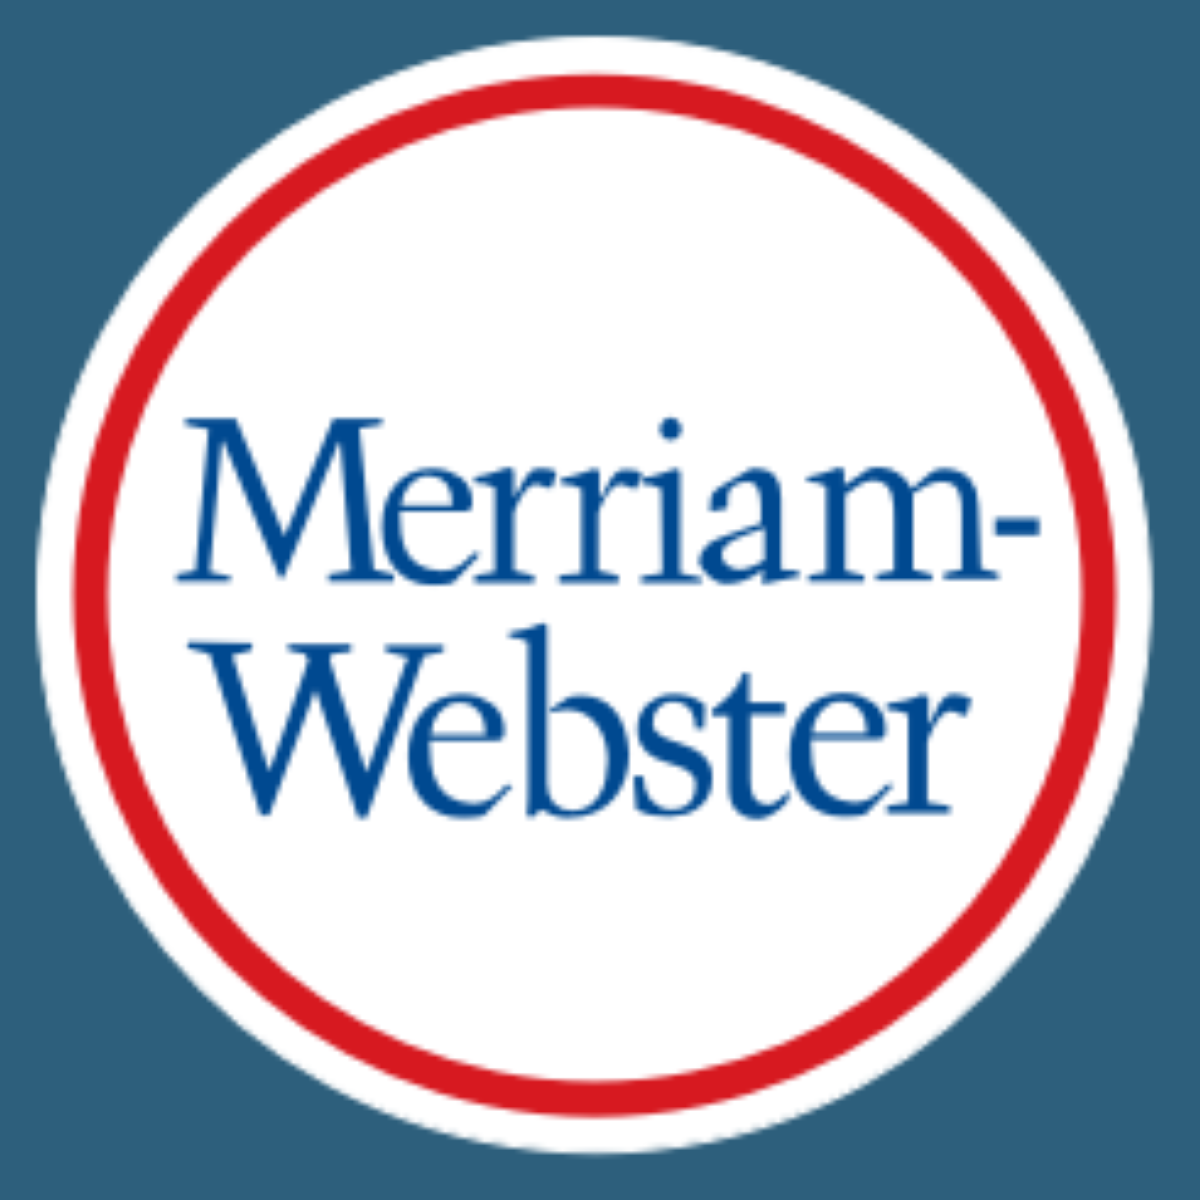 merriam-webster crowns 'authentic' as word of the year